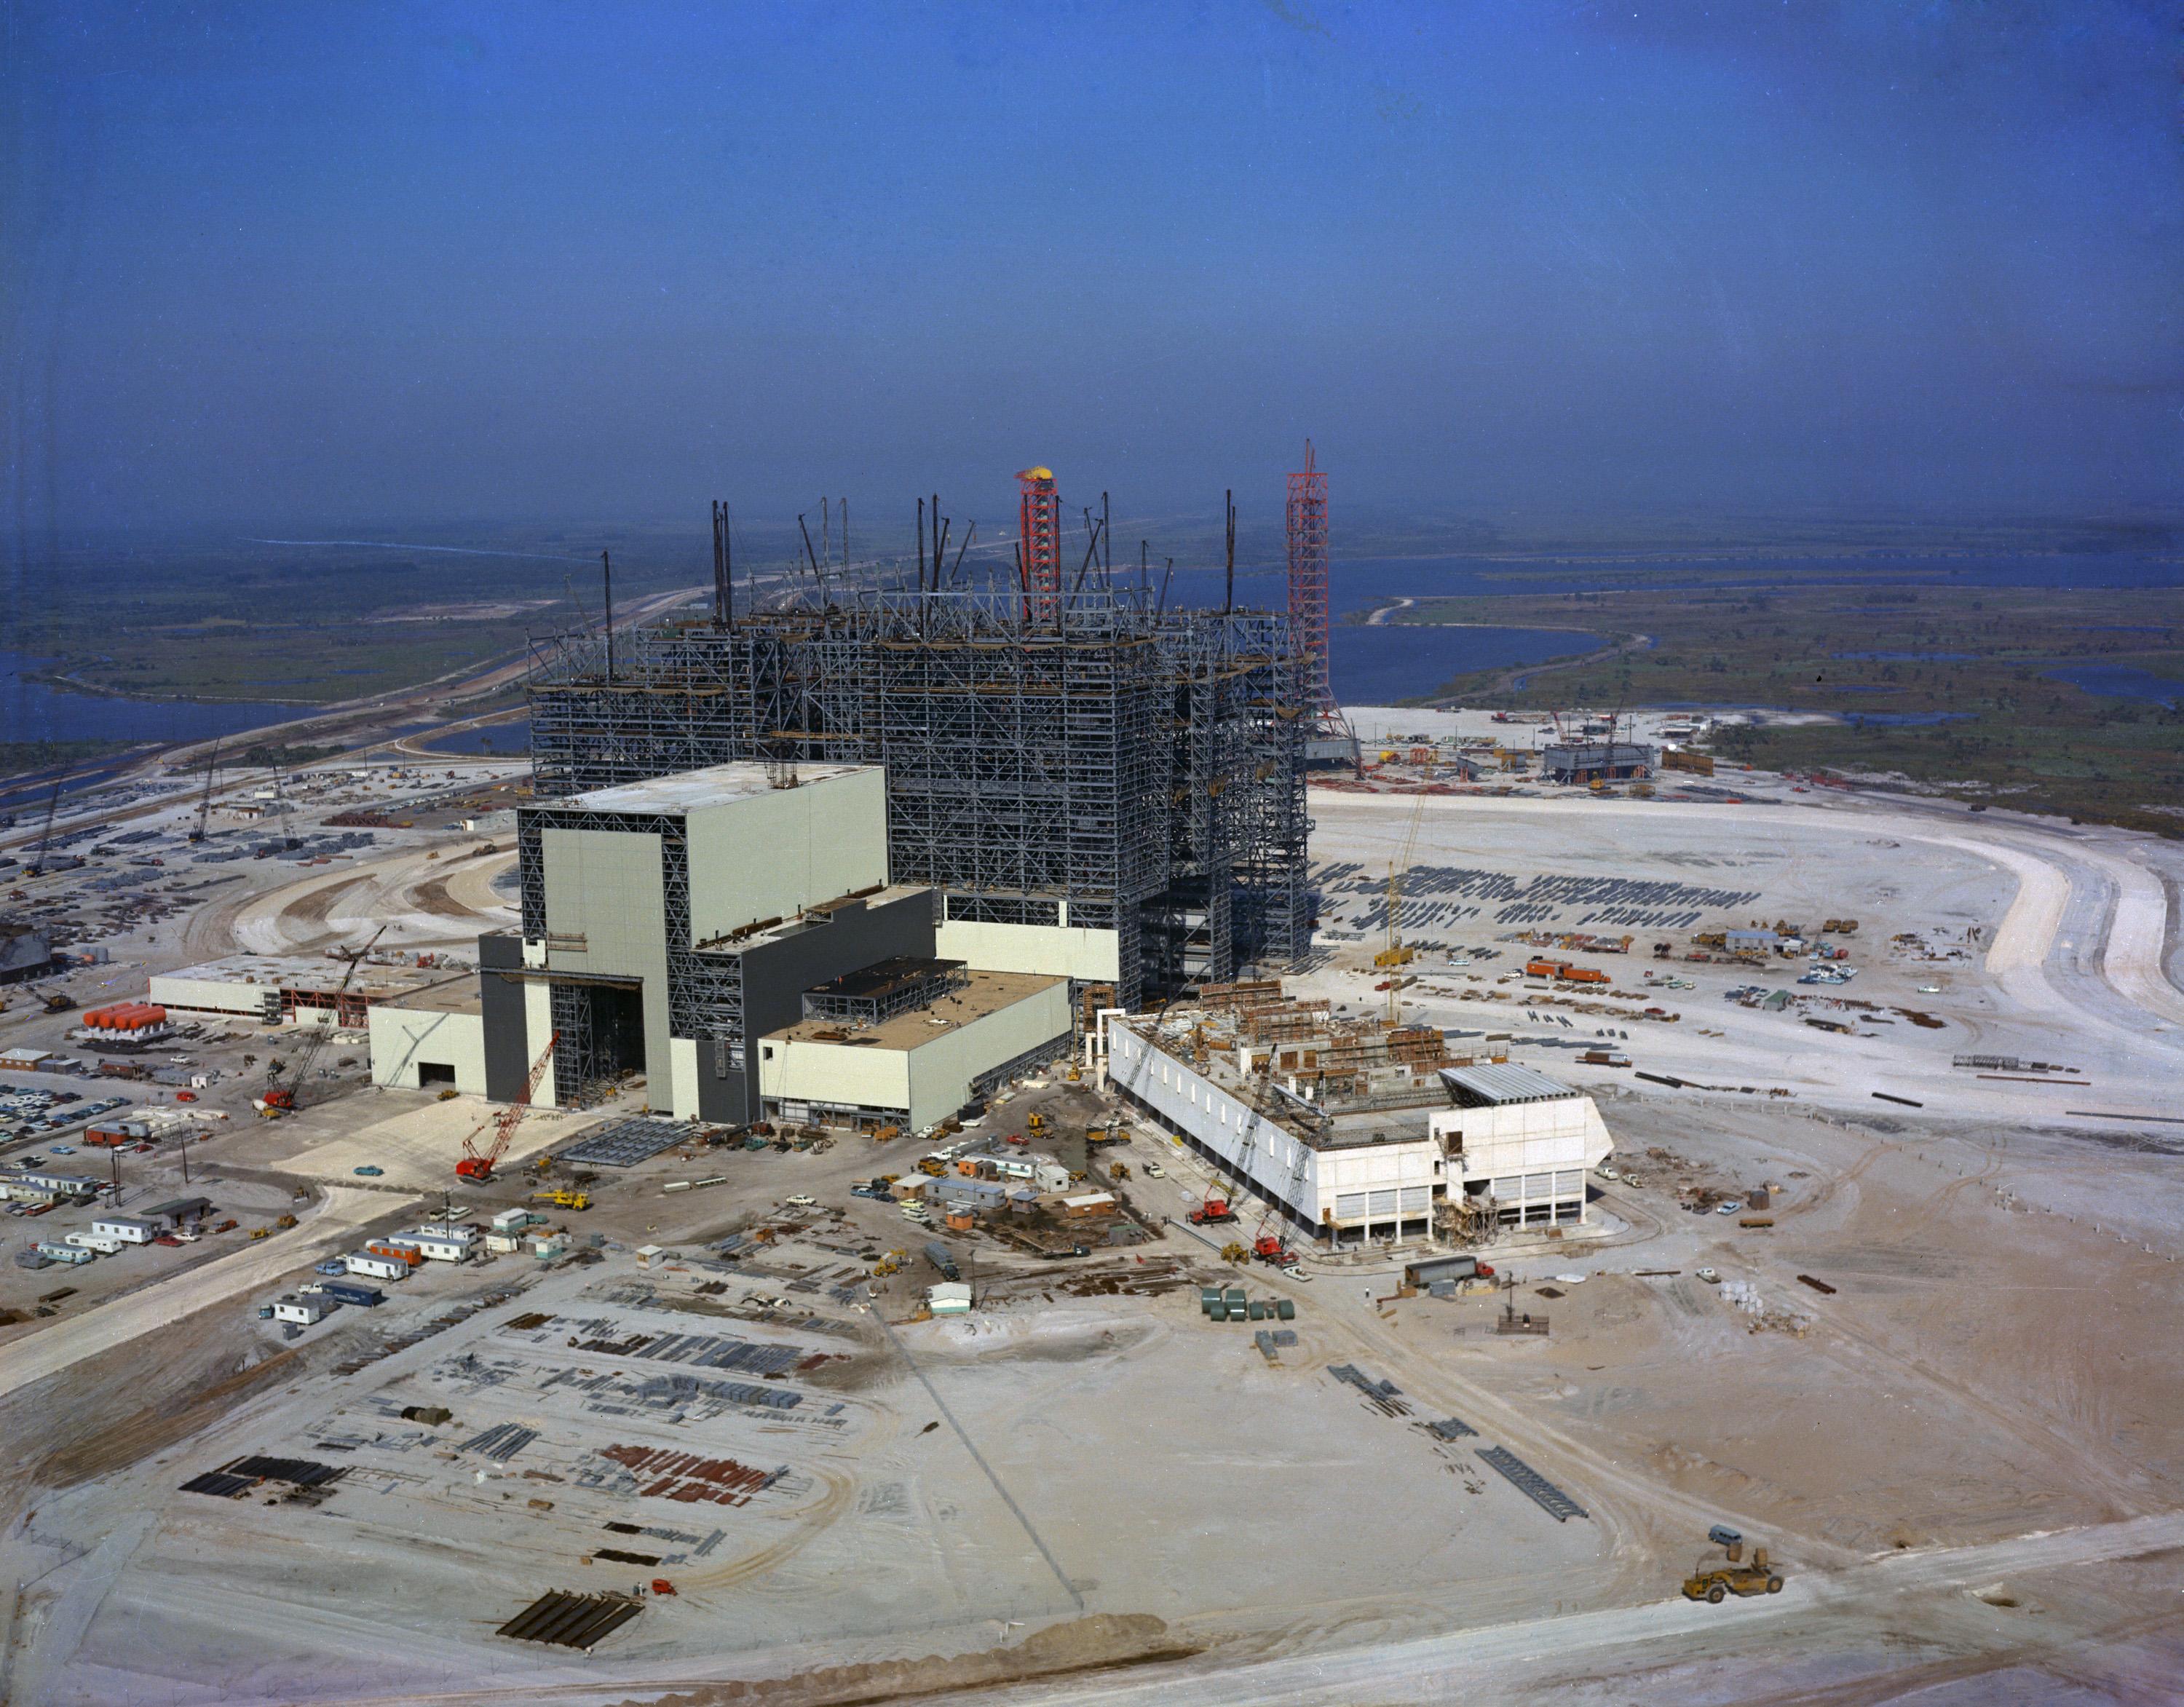 Aerial view of the Vehicle Assembly Building site at Kennedy Space Center showing the building under construction.